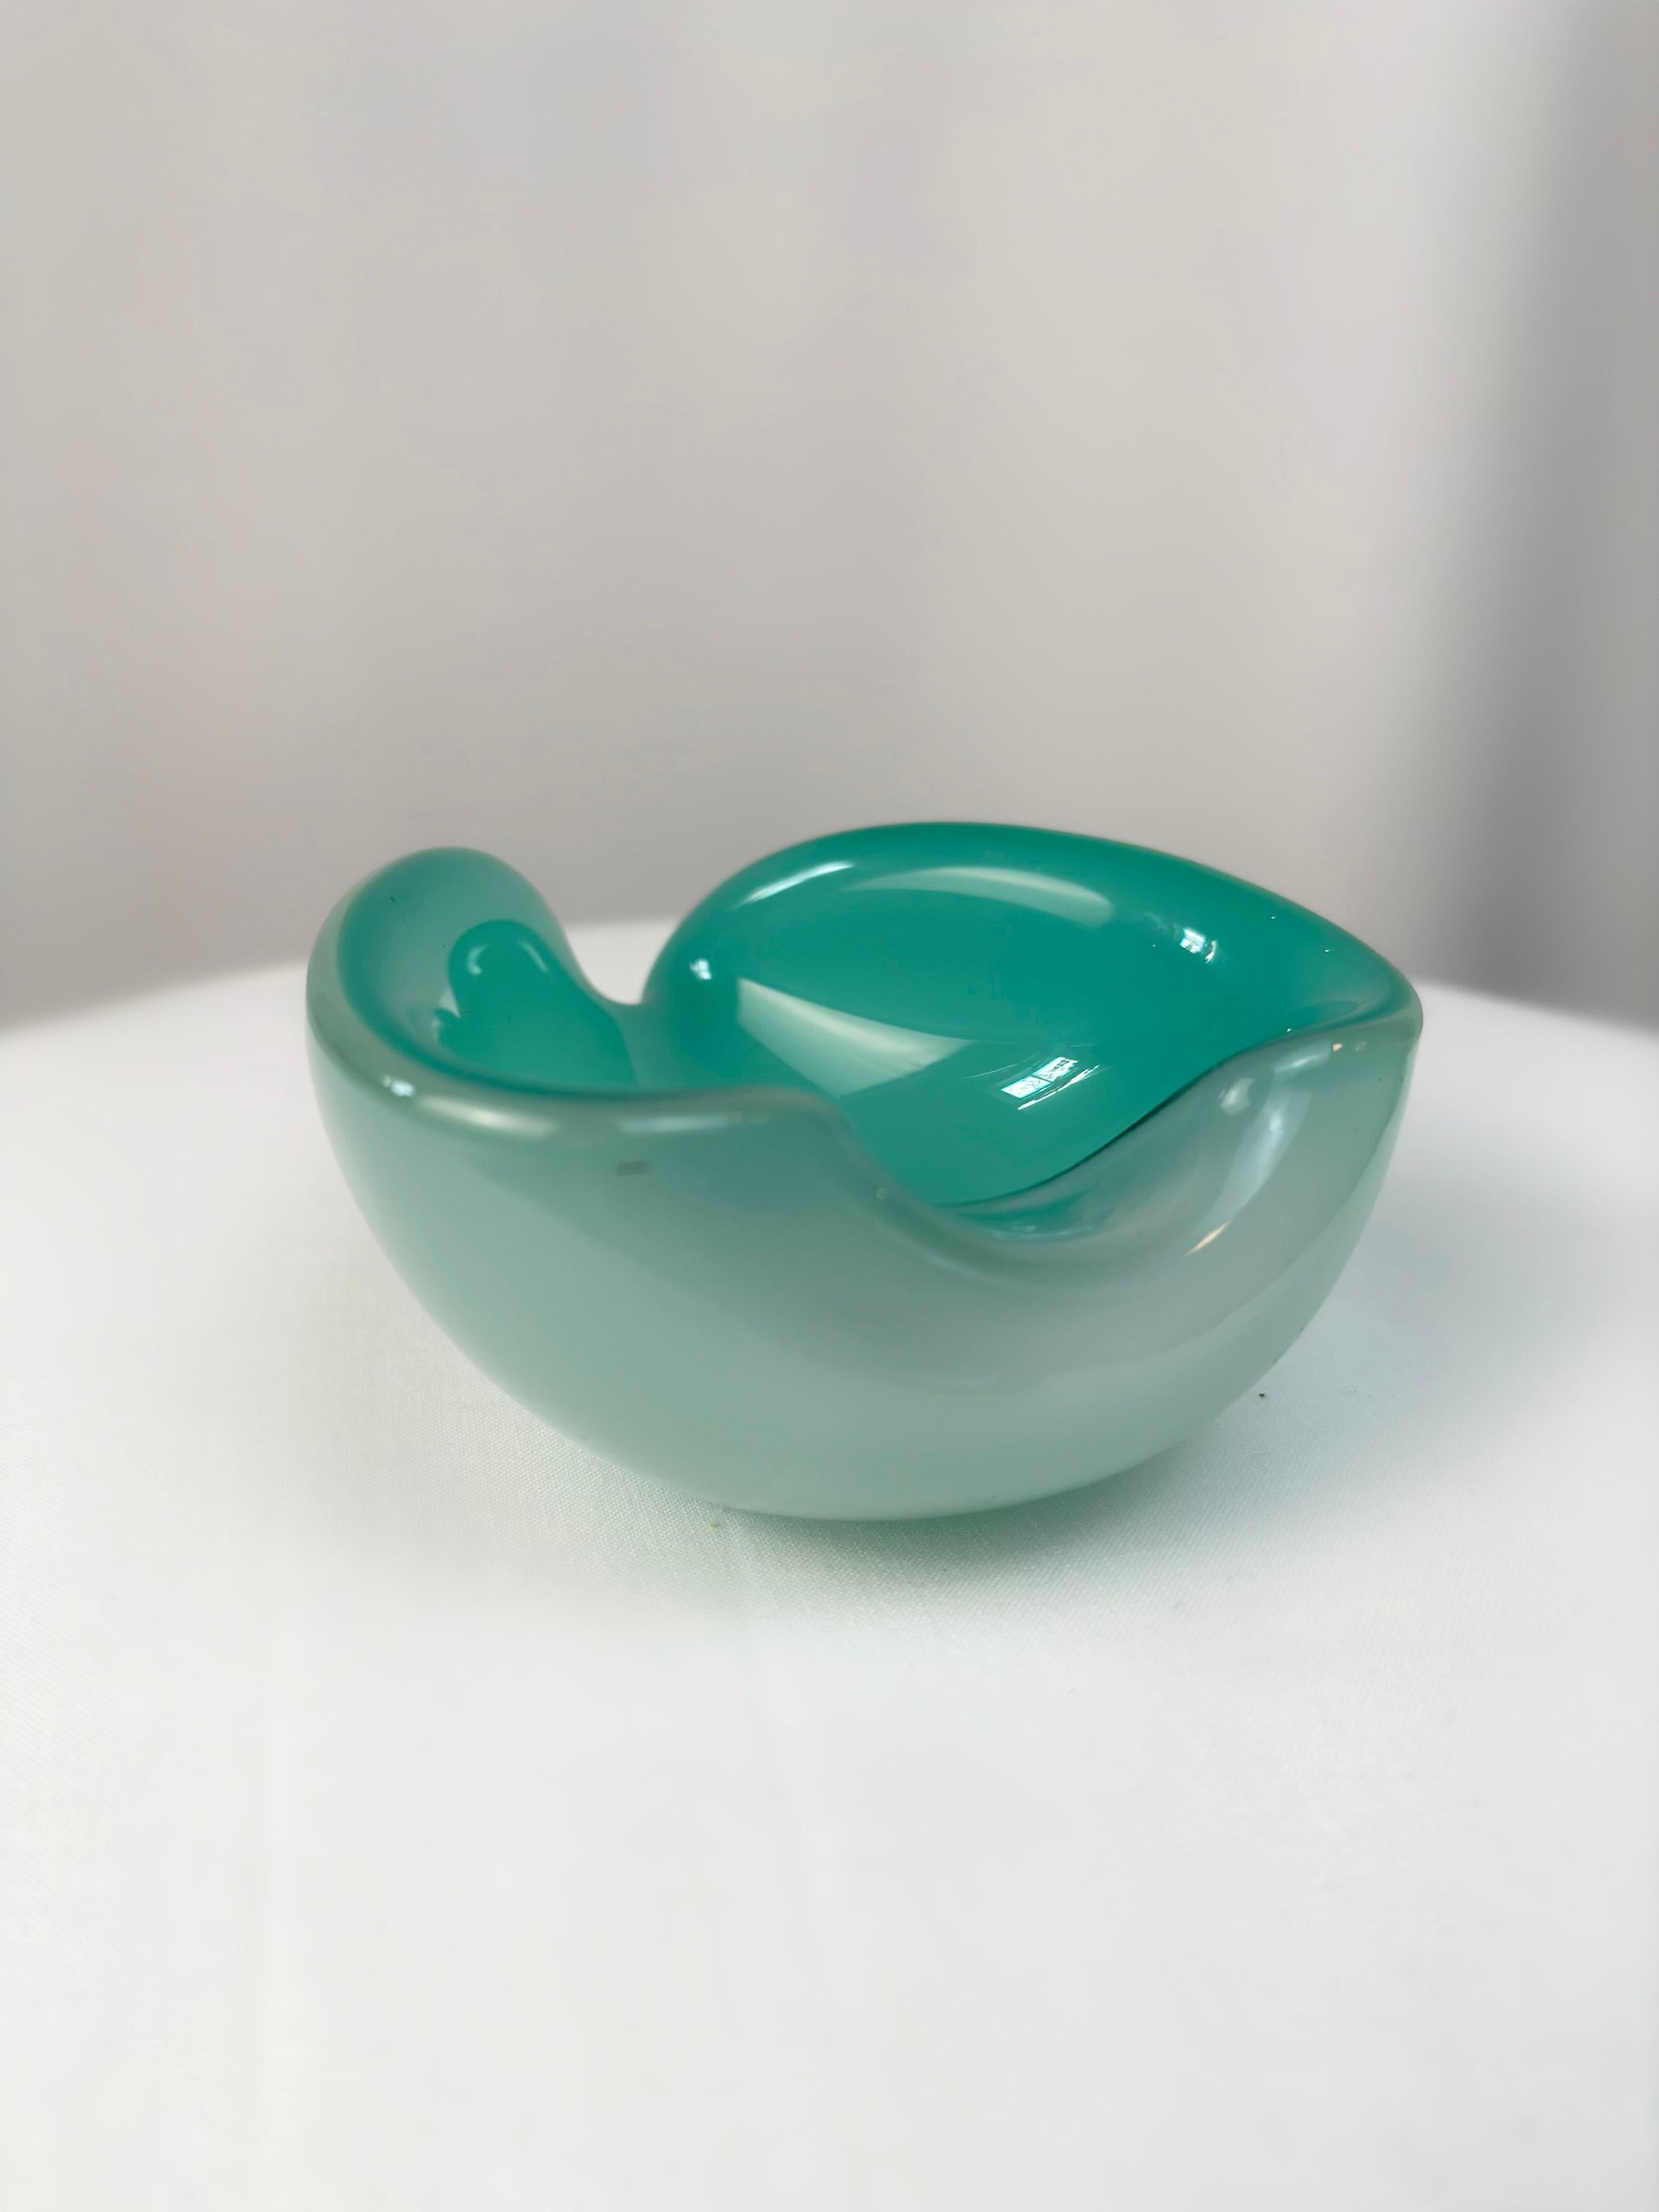  Vintage Murano Glass dish, attributed to Archimede Seguso from the 1970s

The dish been expertly handcrafted from two layers of glass—one in turquoise and the other in white. This technique bestows the dish with a captivating sense of depth,